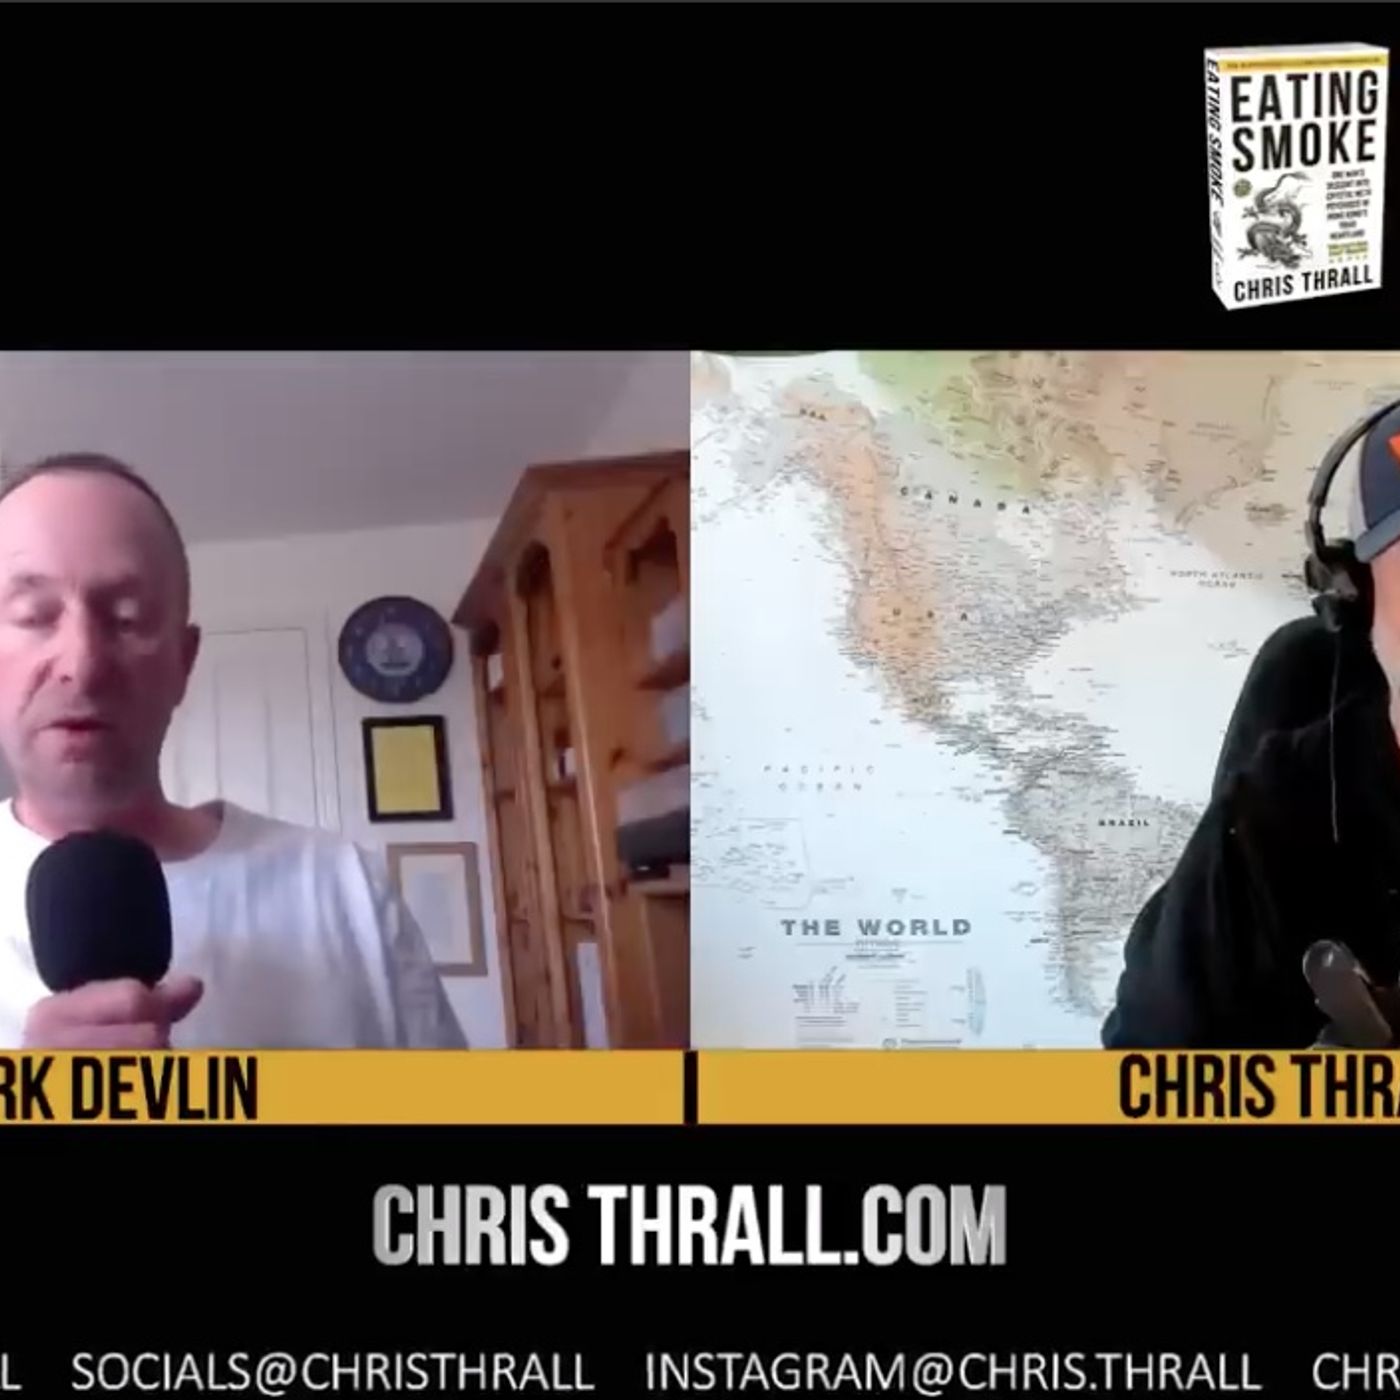 Mark Devlin guests on Chris Thrall’s Bought The T-shirt podcast, June 23